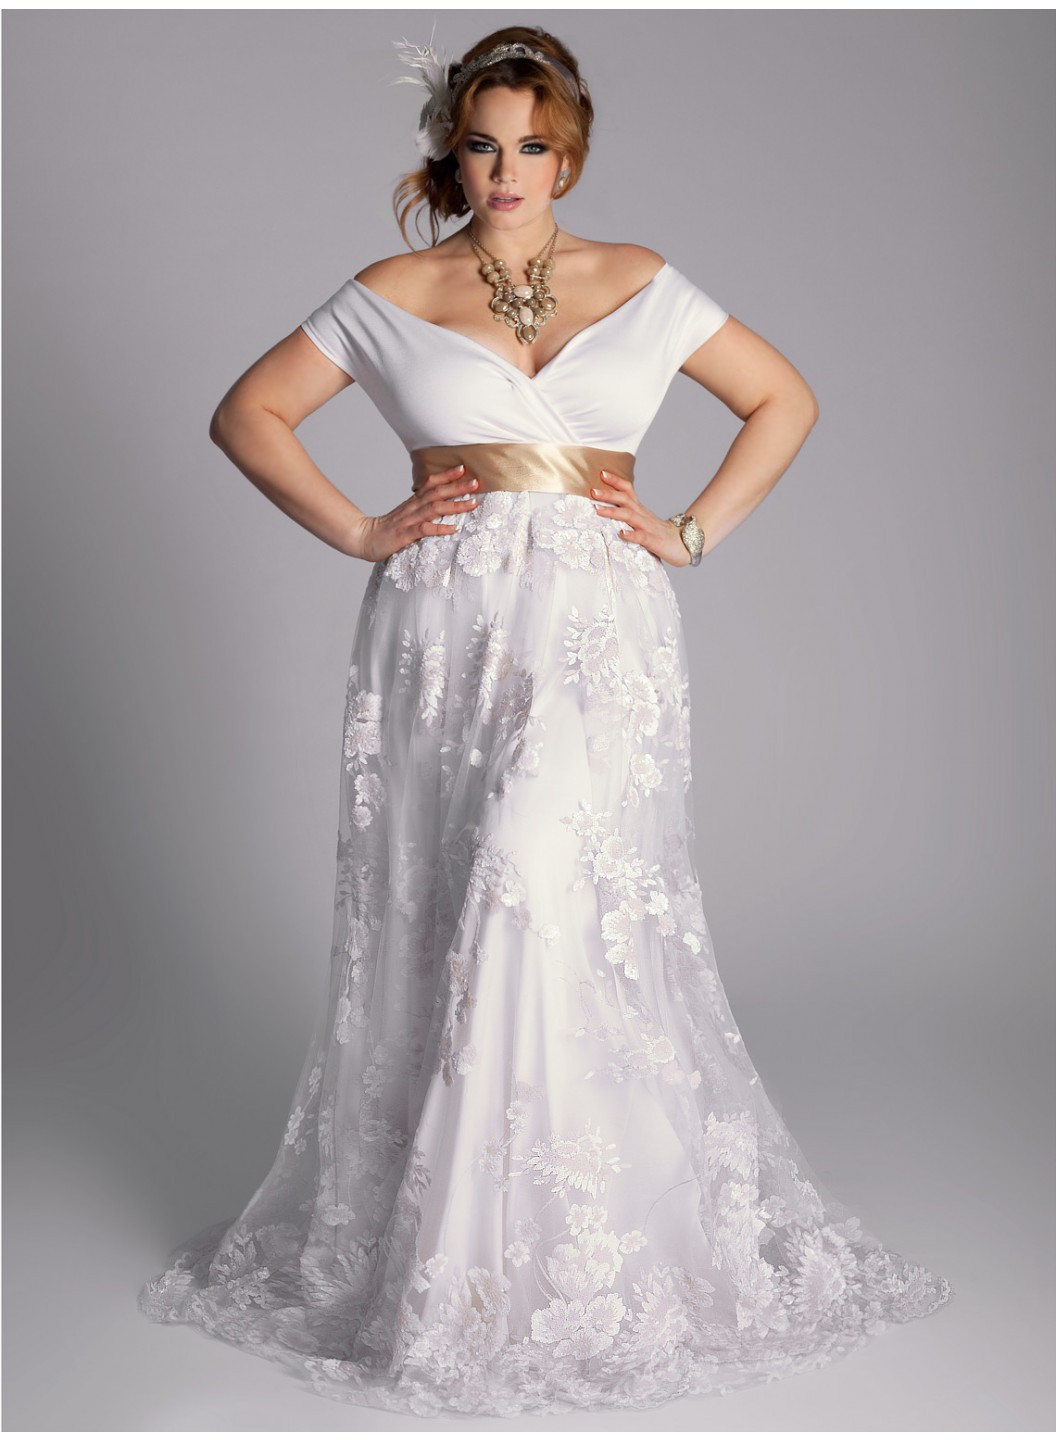 Plus Size Vintage Wedding Gowns
 Ten Plus Size Lace Wedding Dresses That You Will Love